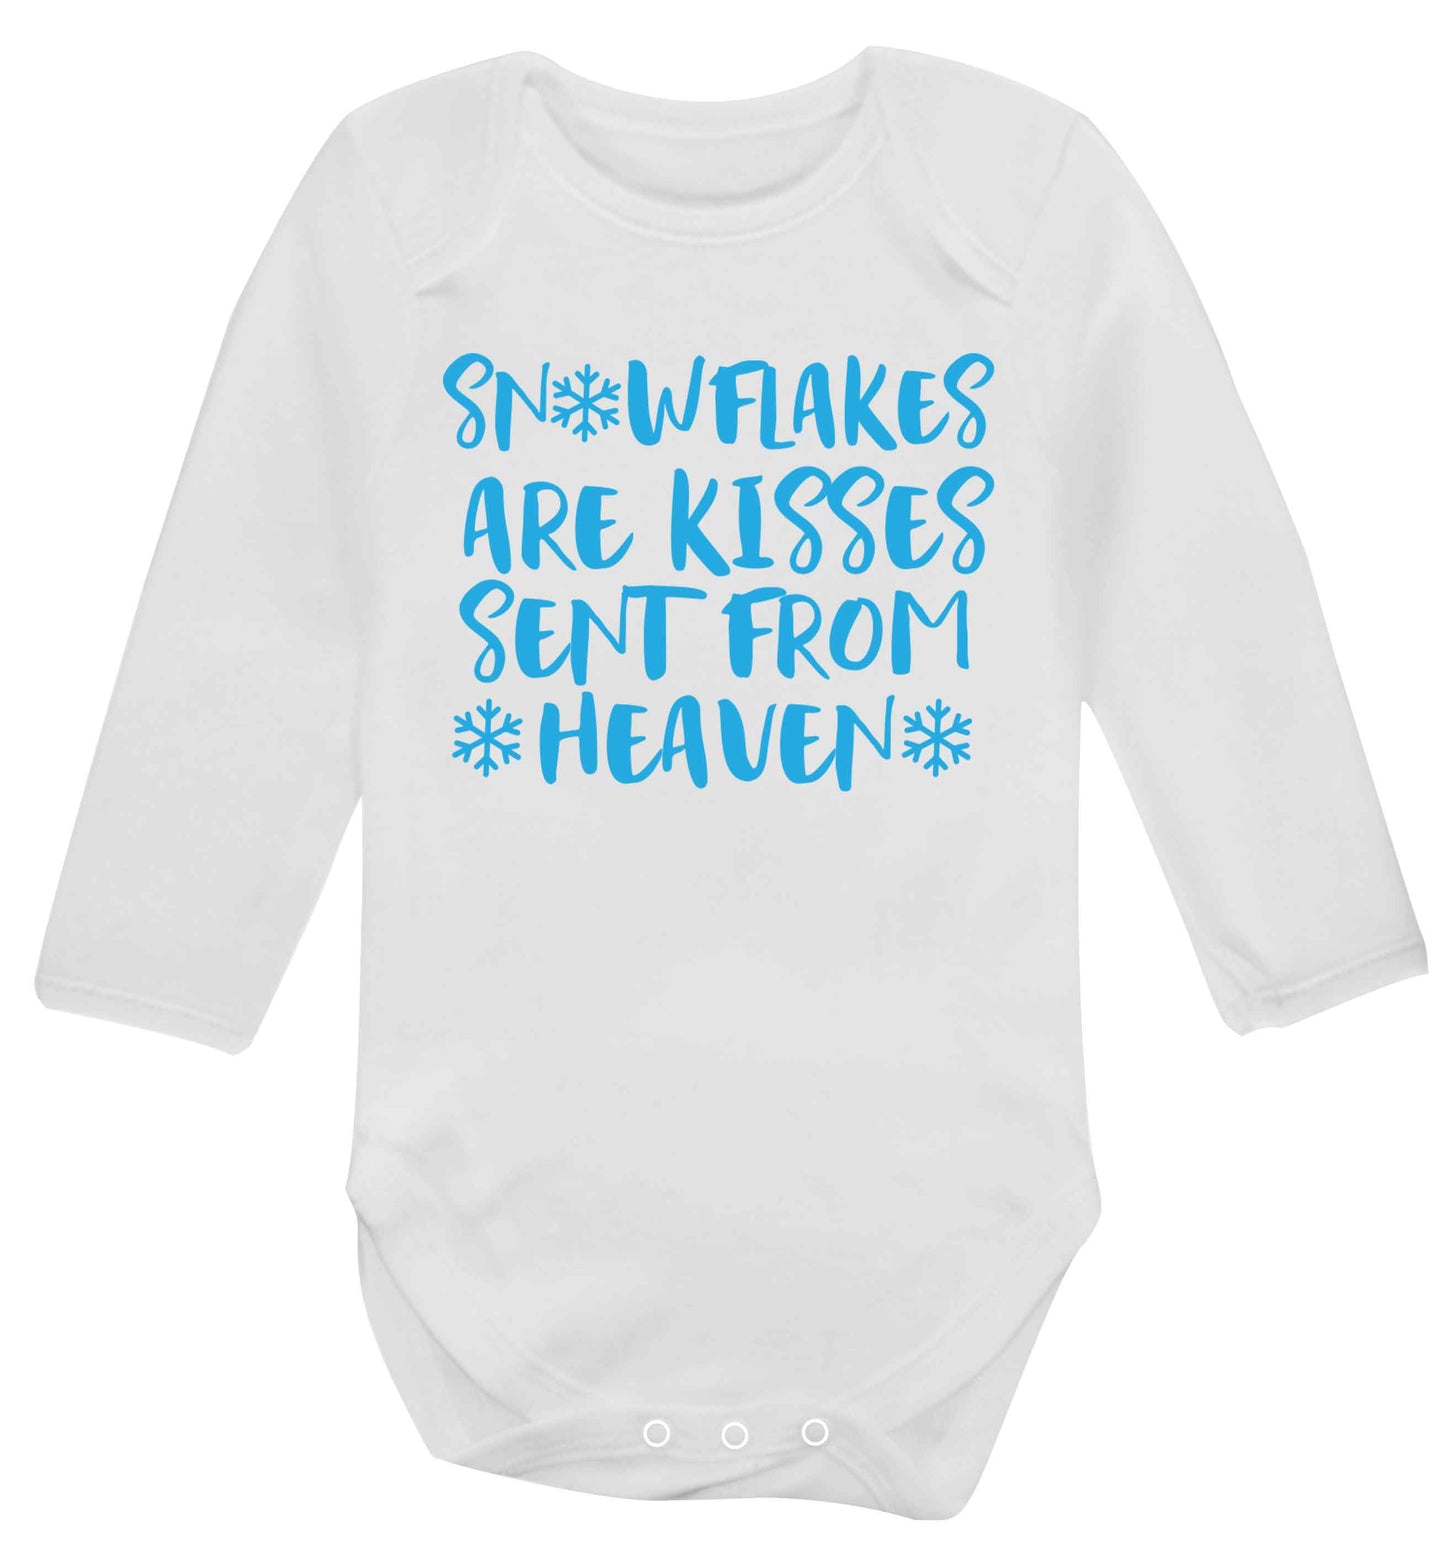 Snowflakes are kisses sent from heaven Baby Vest long sleeved white 6-12 months